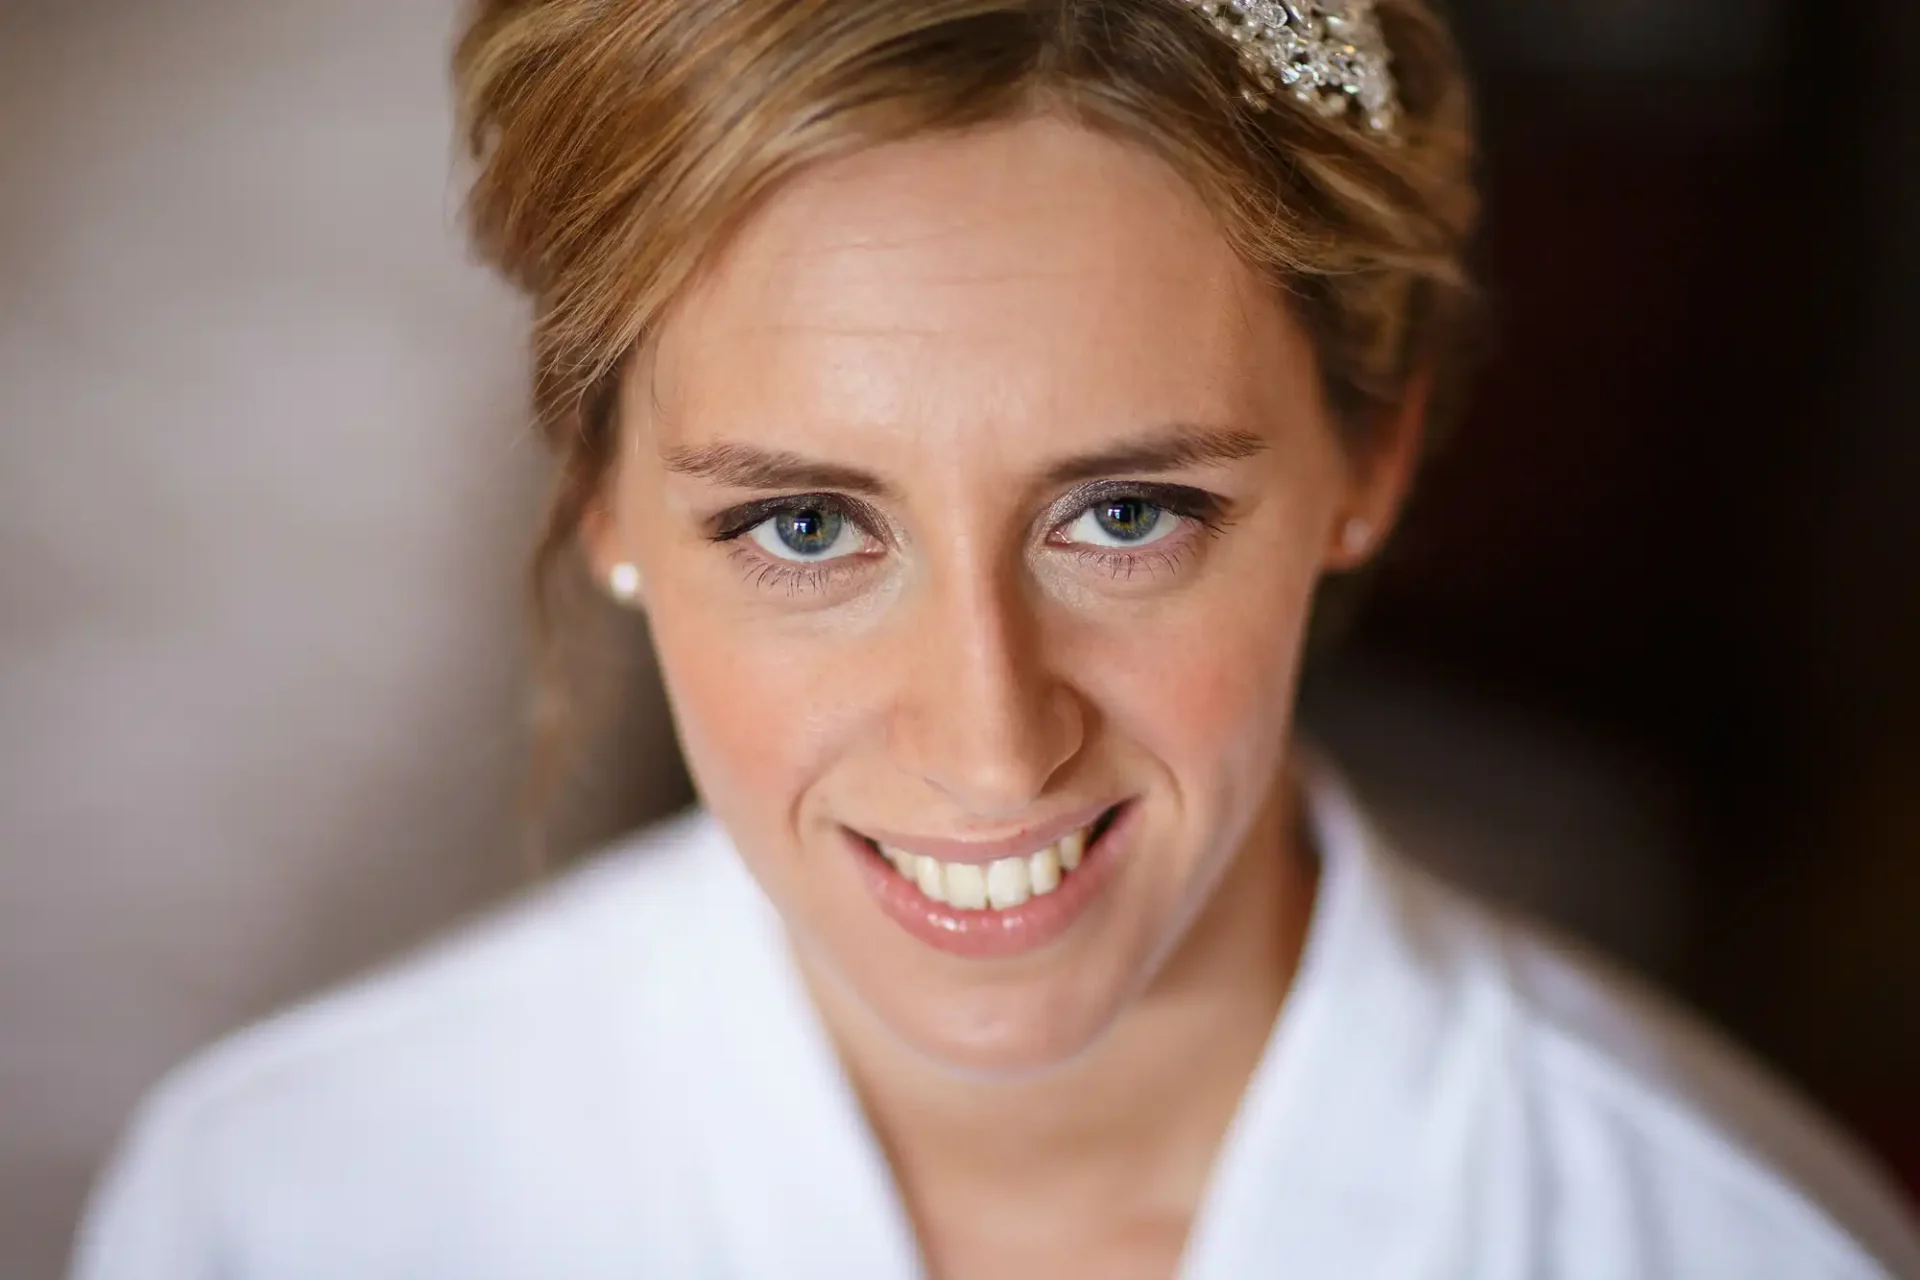 Close-up of a smiling woman with an updo hairstyle, wearing a white robe and a decorative hair accessory, with a soft focus background.